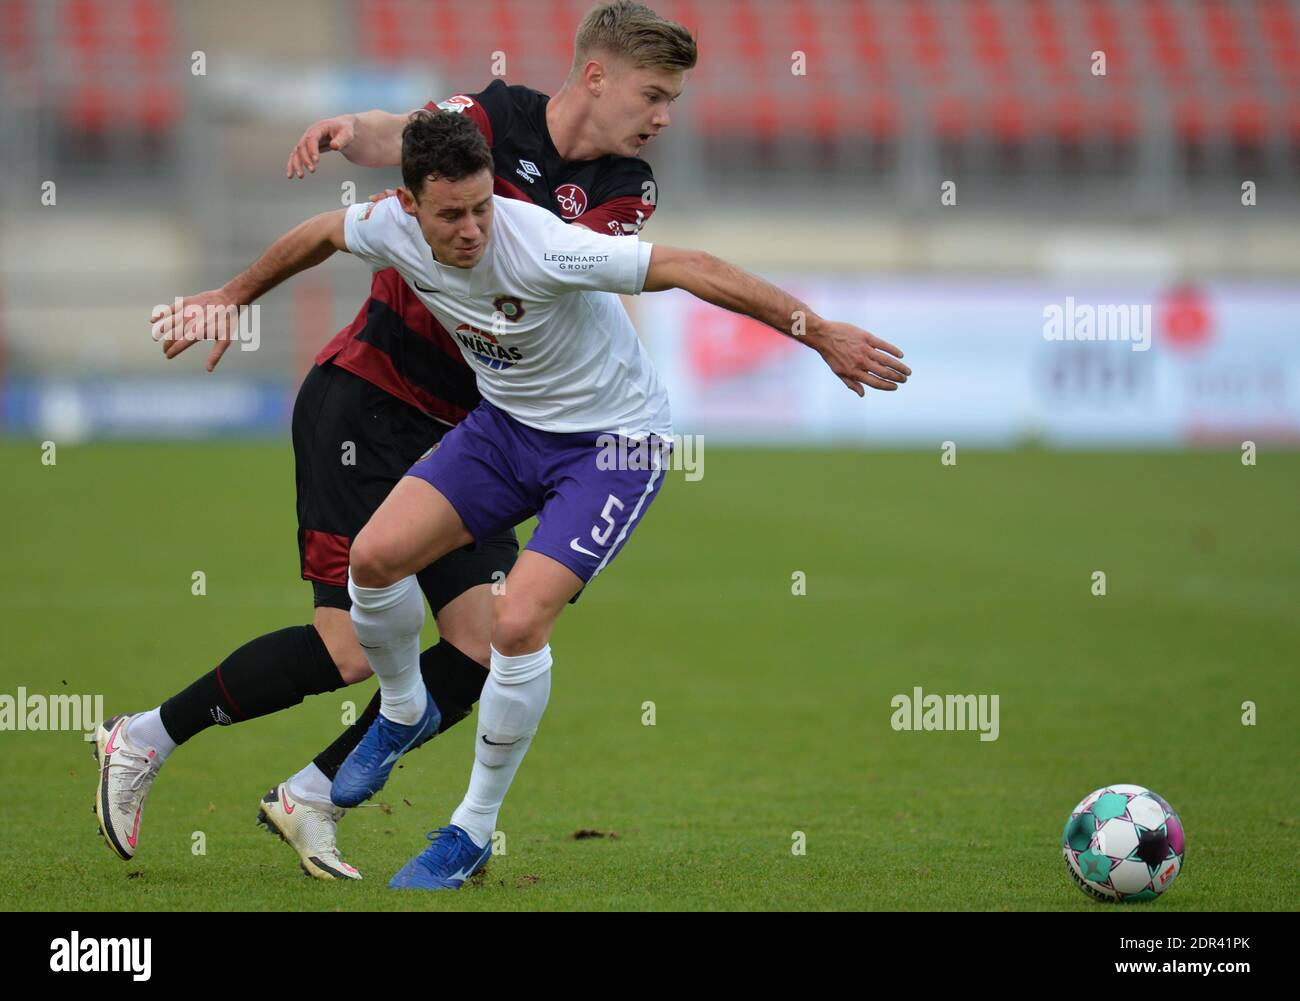 Nuremberg, Germany. 20th Dec, 2020. Soccer: 2. Bundesliga, 1. FC Nürnberg - Erzgebirge Aue, Matchday 13, Max-Morlock-Stadion Nürnberg: Nuremberg's Noel Knothe (l) plays against Clemens Fandrich from Aue. Credit: Timm Schamberger/dpa - IMPORTANT NOTE: In accordance with the regulations of the DFL Deutsche Fußball Liga and/or the DFB Deutscher Fußball-Bund, it is prohibited to use or have used photographs taken in the stadium and/or of the match in the form of sequence pictures and/or video-like photo series./dpa/Alamy Live News Stock Photo